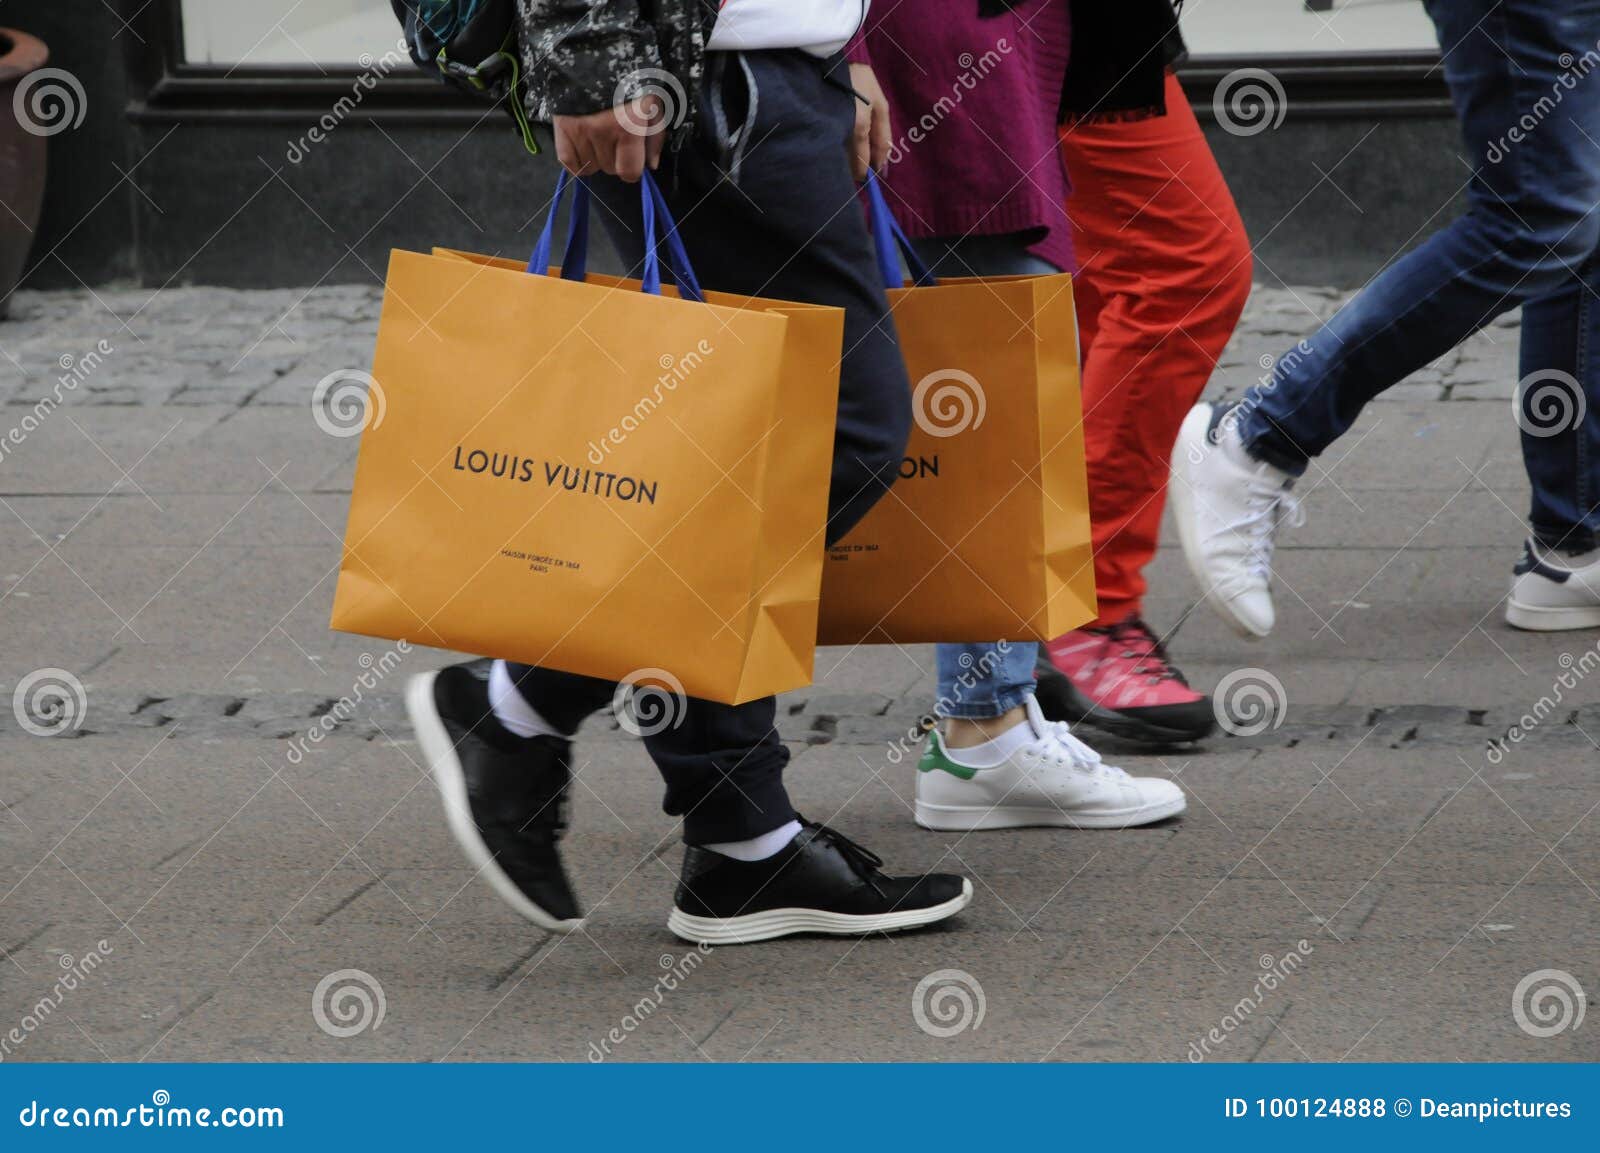 ASIAN SHOPPERS BUY LOUIS VUITTON PRODUCTS Editorial Stock Photo - Image of tourists, people ...